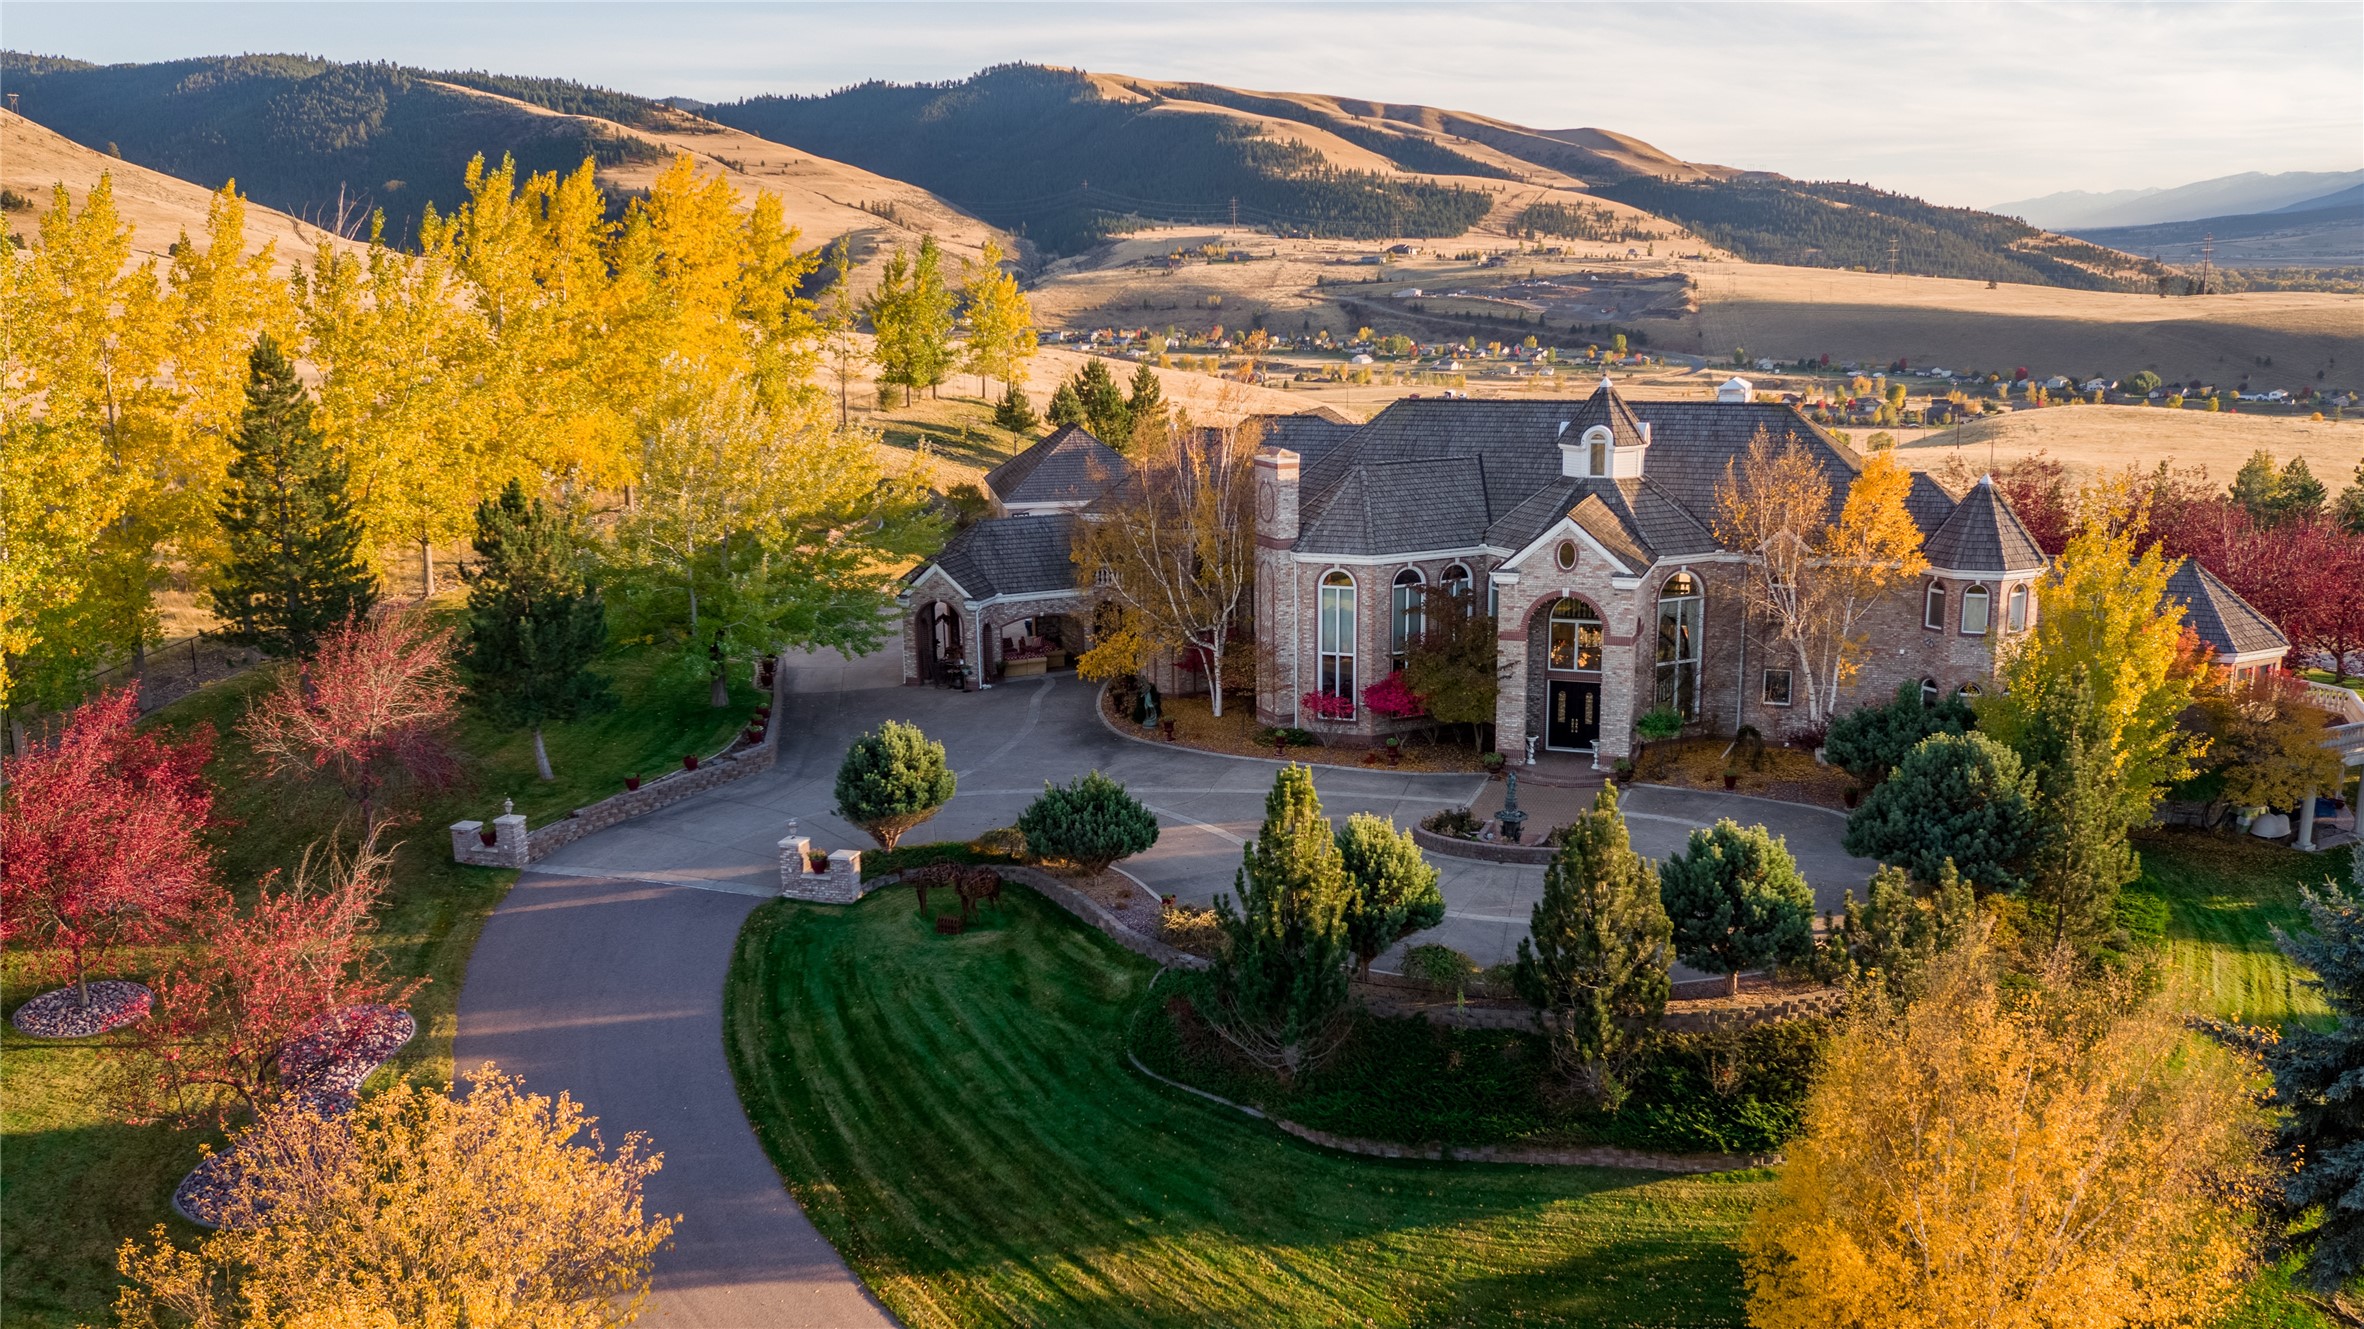 Best views you will see of Missoula and Bitterroot valleys.  County lot and borders city limits. No HOA or COV/RES on 10.73 acres. 12,000 sq ft brick estate on exquisite grounds. Roman pool and pool house, waterfall, exterior 1600 sq ft brick/motorhome building. Exterior 1200 sq ft brick detached 2 car garage. three-car attached garage. New roof May 2022. House is finished by published artists.   5 full 3 3/4 2 1/2 bathrooms 8 bedrooms; main floor master for dual careers: 2 bathrooms, 2 office rooms, 2 walk-in closets, sitting room, bar, and w/d. Custom marble, hardwood, tile floors, counters, and draperies. Walkout daylight basement, theater room, 4 laundry rooms, soaring 30 ft glass art ceiling in the entryway. Custom wooden doors, brass hardware, and baseboards. Imported marble fireplaces, and permanent lighting throughout.  Please see house description for more details. This property is truly one of a kind!